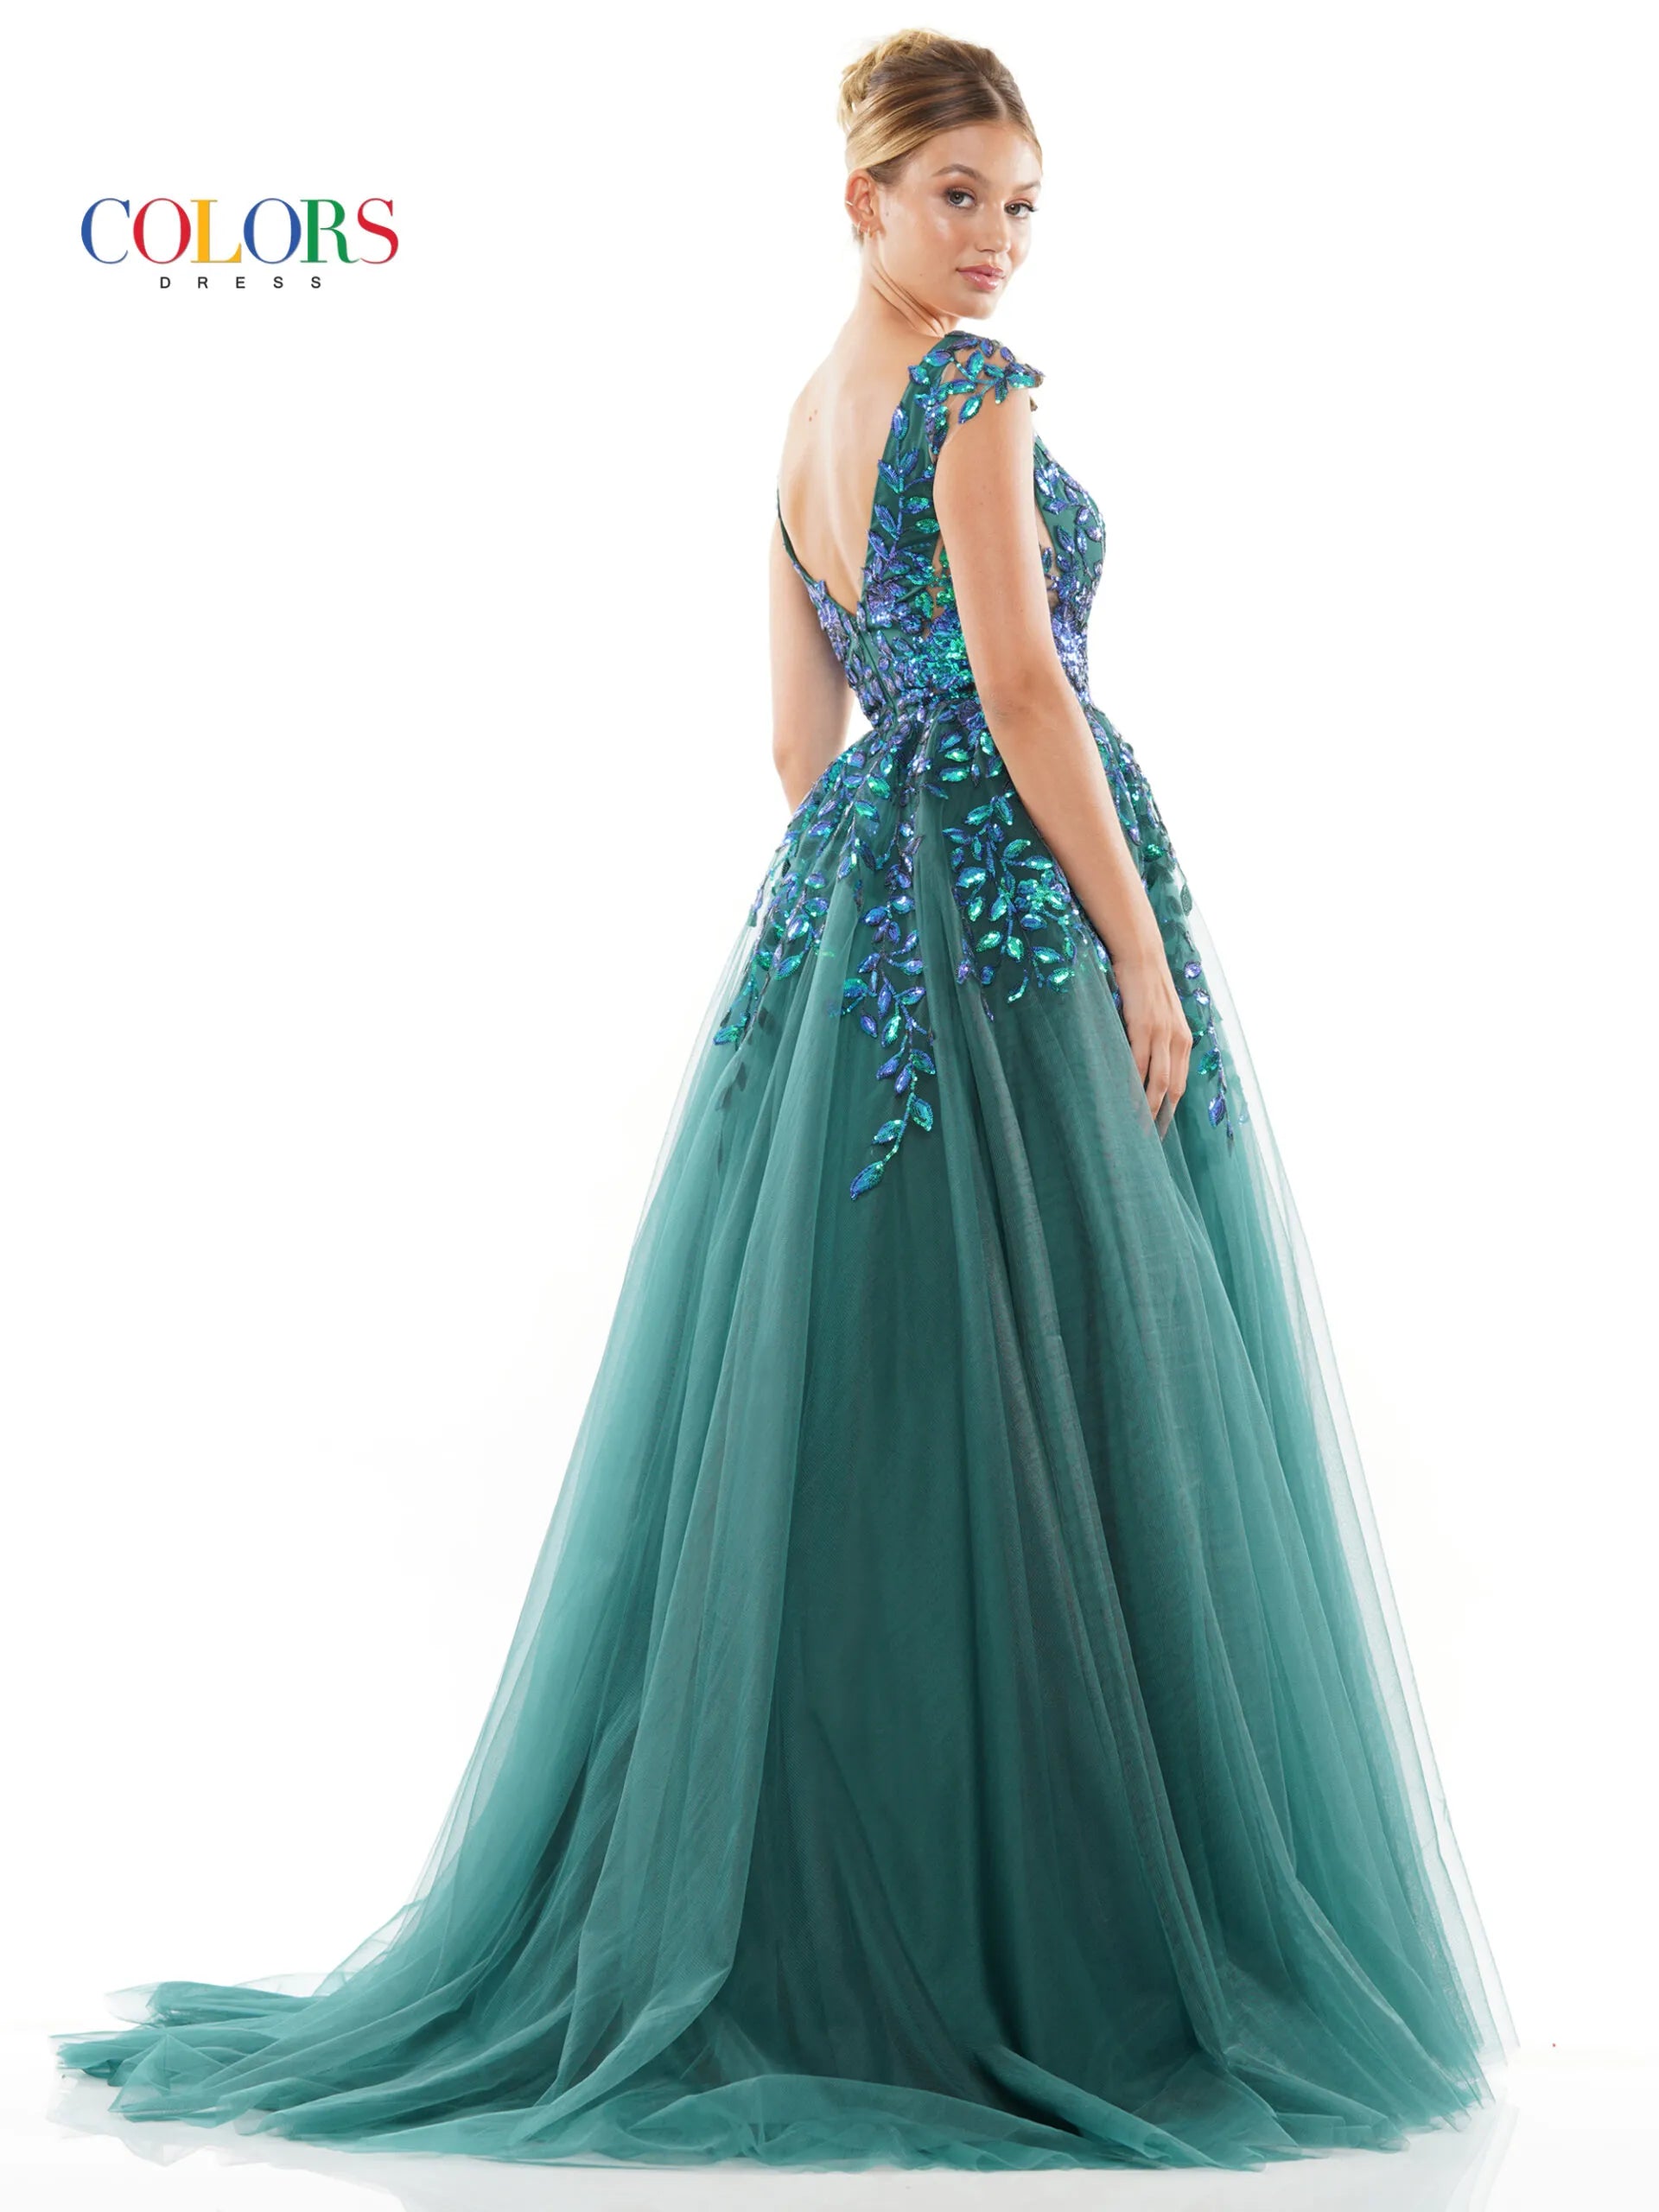 With sheer side panels, the Colors Dress 3239 ballgown offers a touch of elegance to your prom or pageant look. The sheer sequin lace adds a subtle shimmer, making you stand out in the crowd. Available in plus sizes, this formal gown is perfect for any special occasion.  Sizes: 0-22  Colors: Light Blue, Off White, Deep Green, Hot Pink